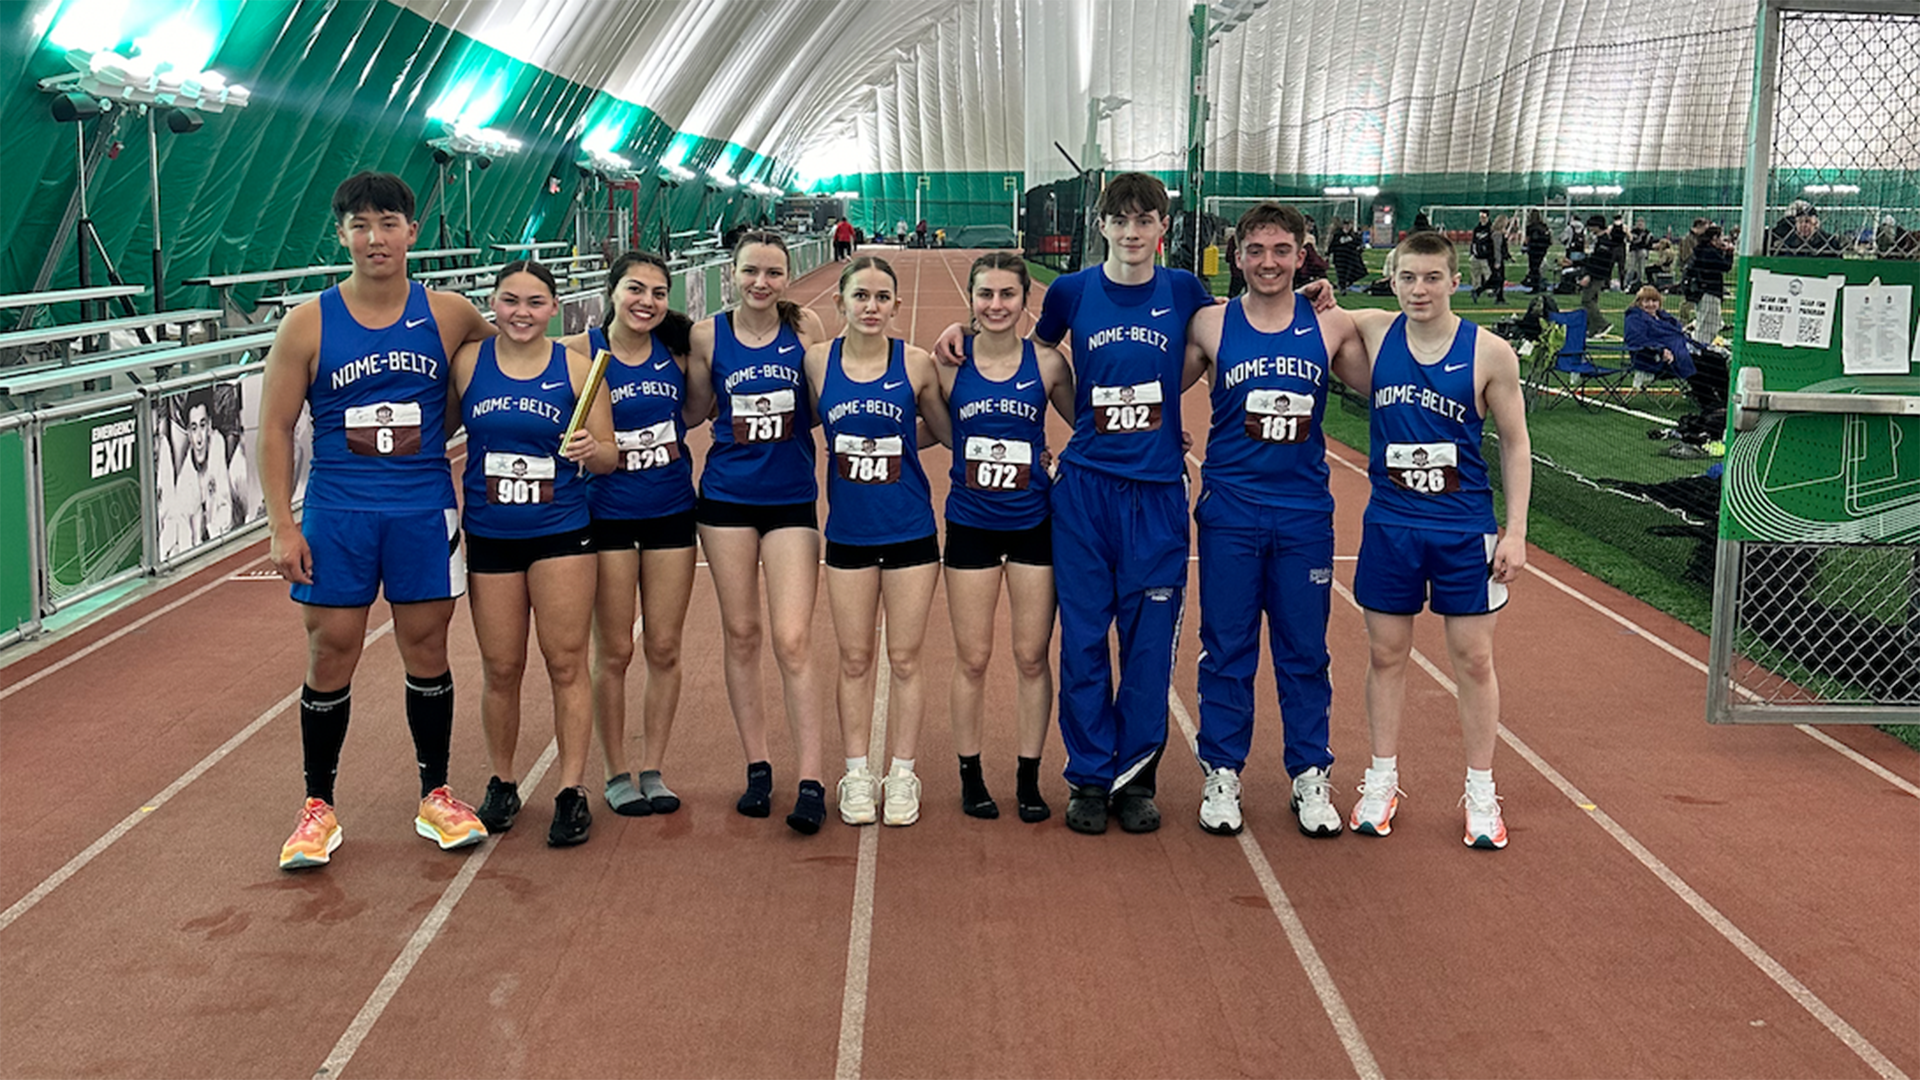 Students on the Nome-Beltz Track and Field team pose for a photo on the indoor track at The Dome in Anchorage, Alaska. Photo courtesy of Ryan Fox.